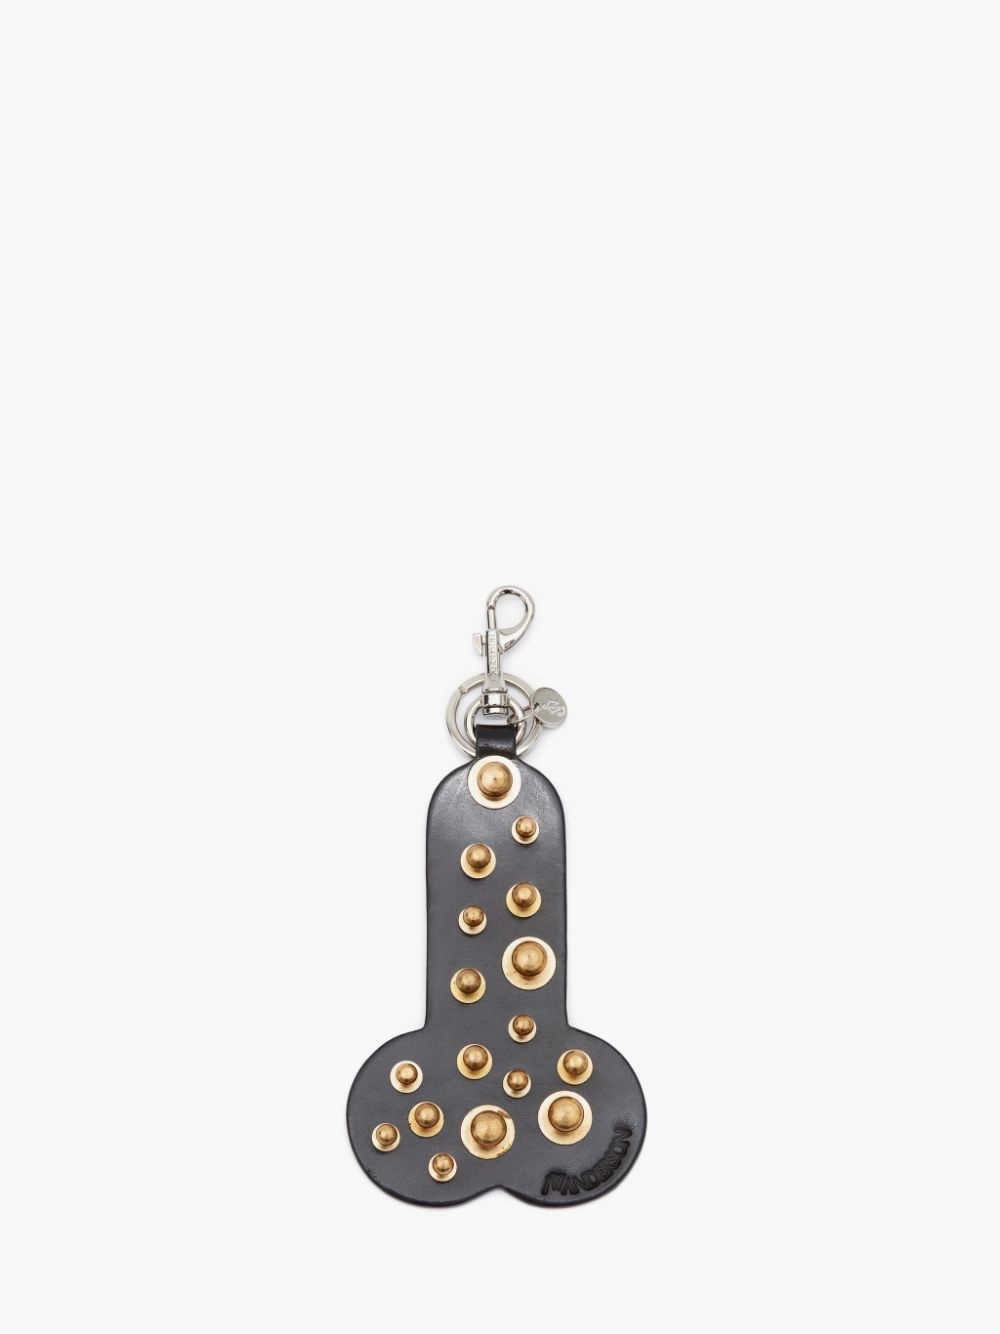 MADE IN BRITAIN: STUDDED PENIS KEYRING - 1